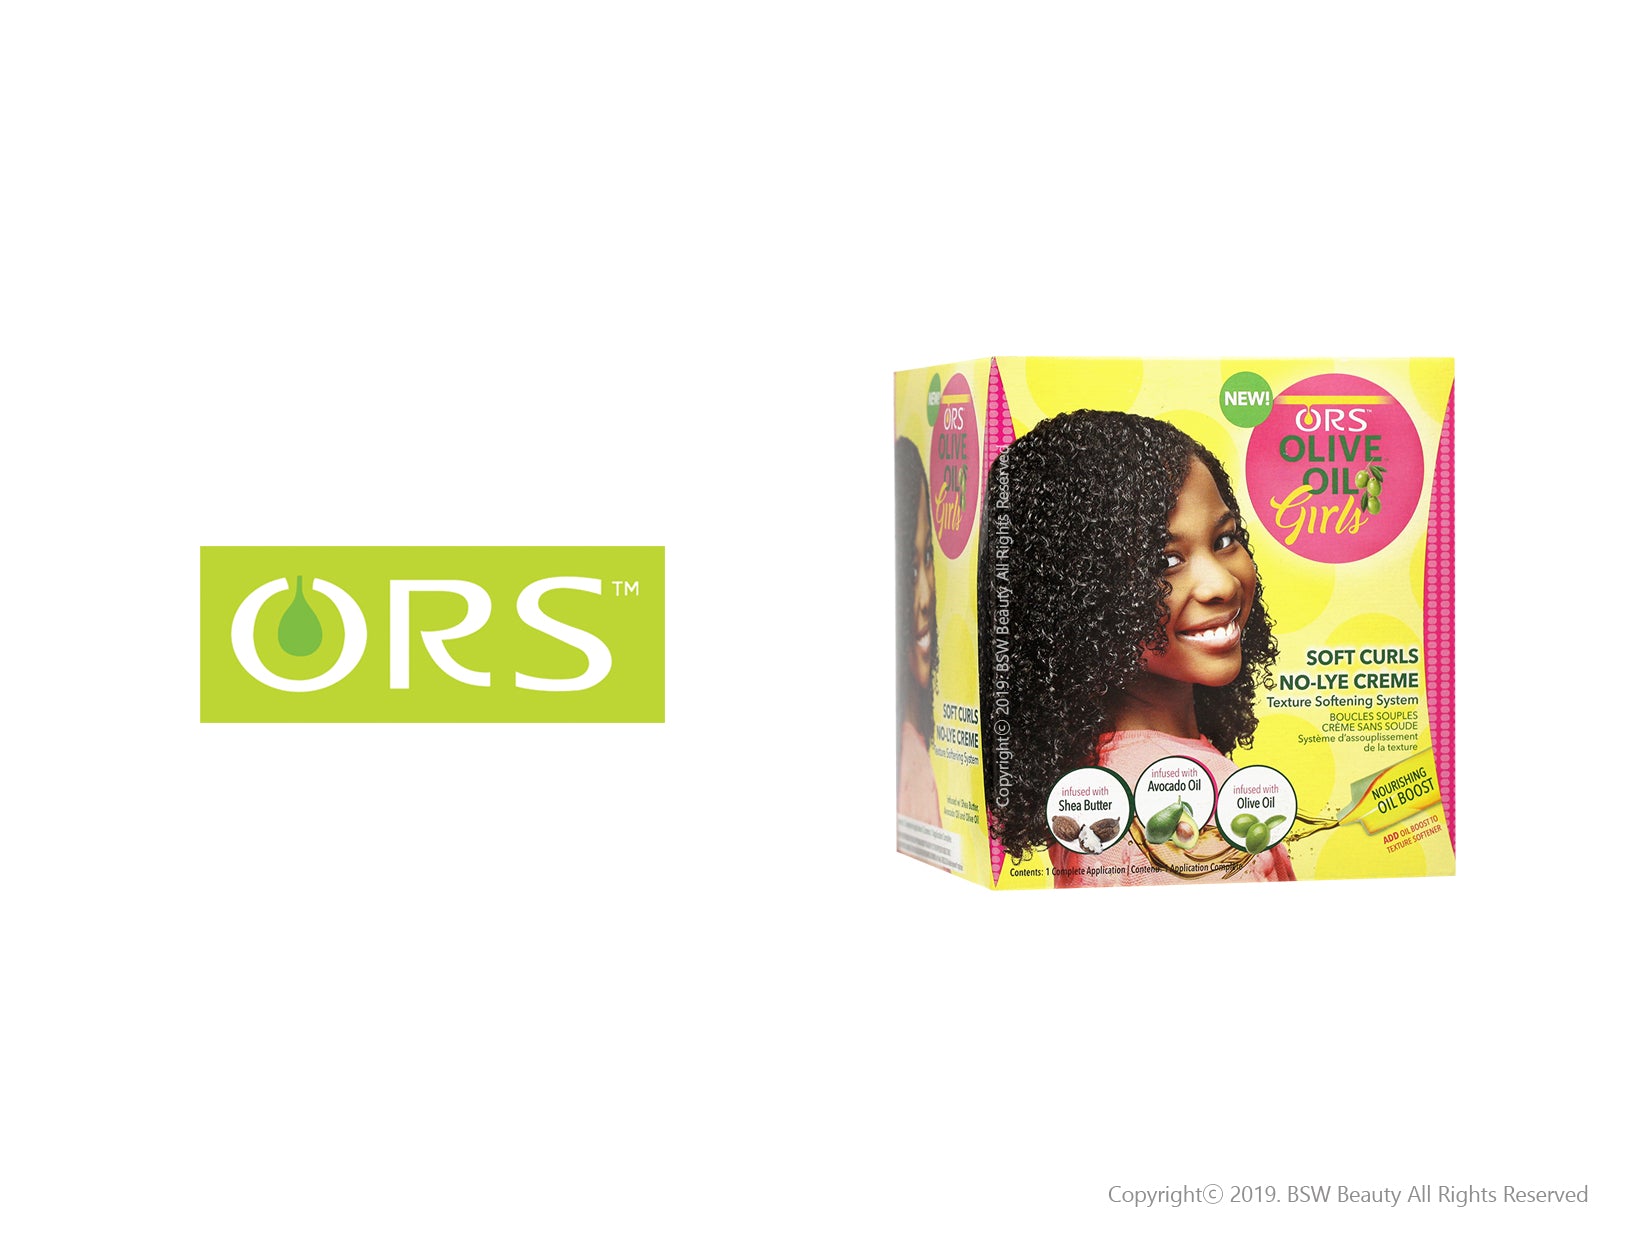 ORS OLIVE OIL GIRLS SOFT CURLS NO LYE CREME TEXTURE SOFTENING SYSTEM